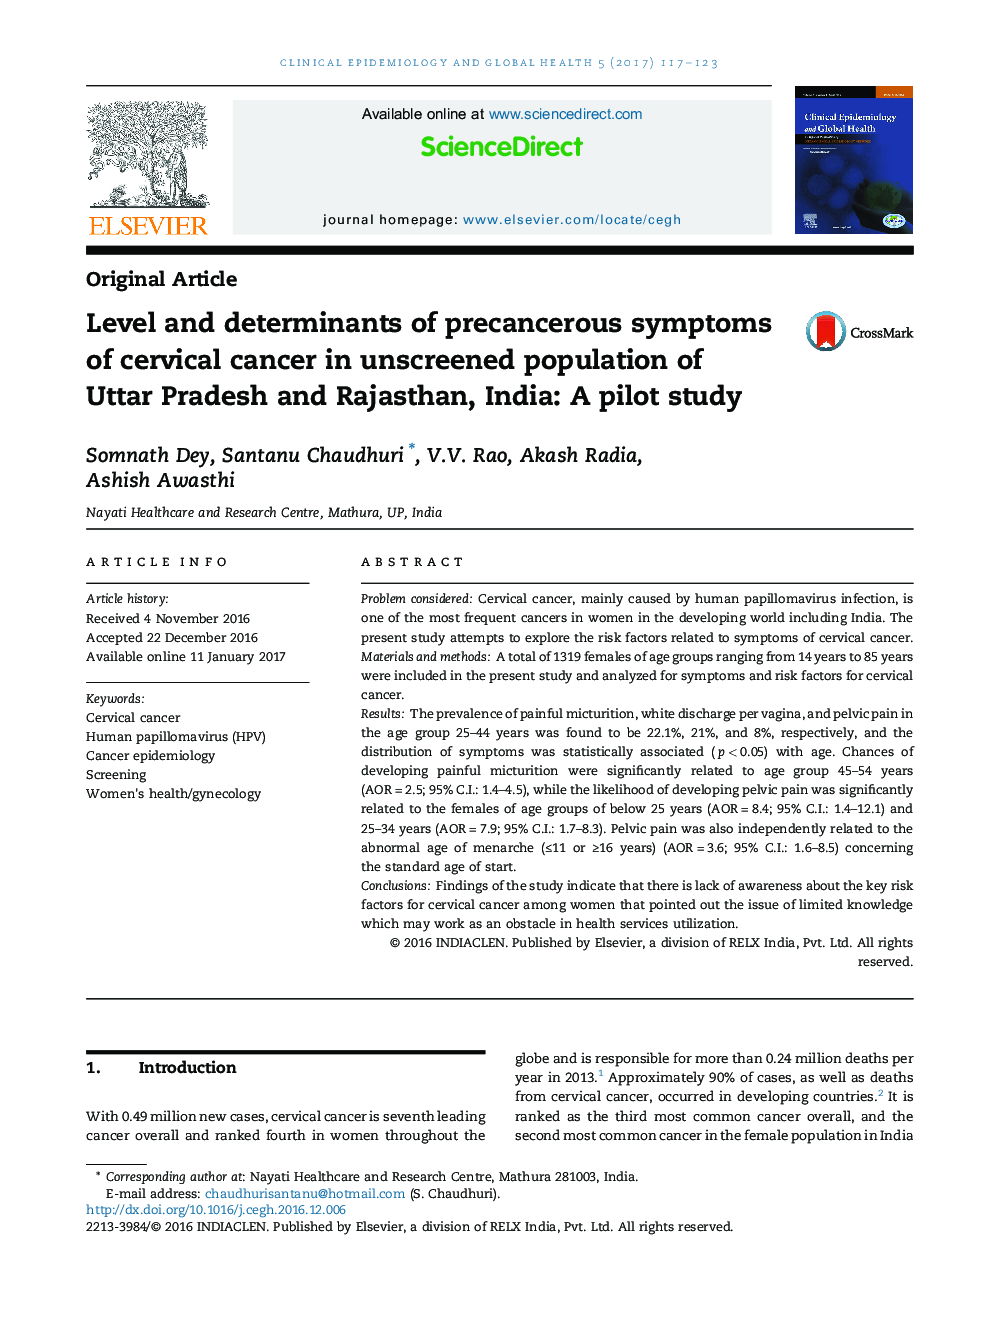 Level and determinants of precancerous symptoms of cervical cancer in unscreened population of Uttar Pradesh and Rajasthan, India: A pilot study